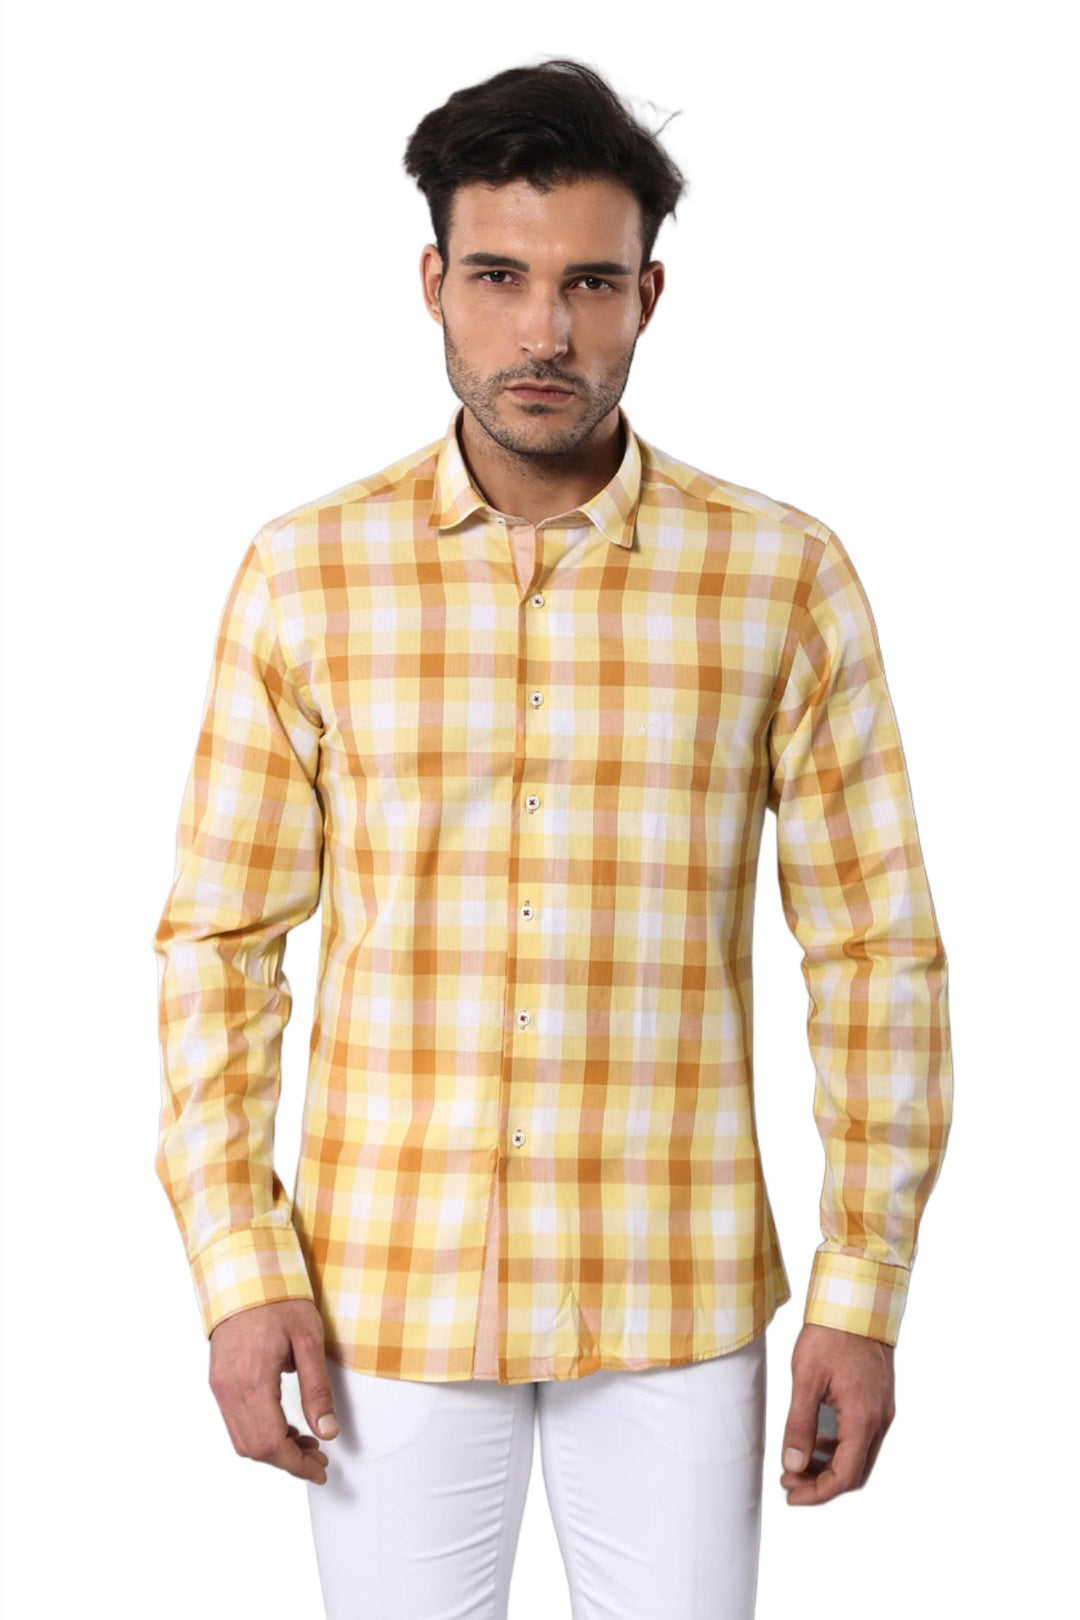 Slim Fit Plaid Patterned Yellow Shirt - Wessi